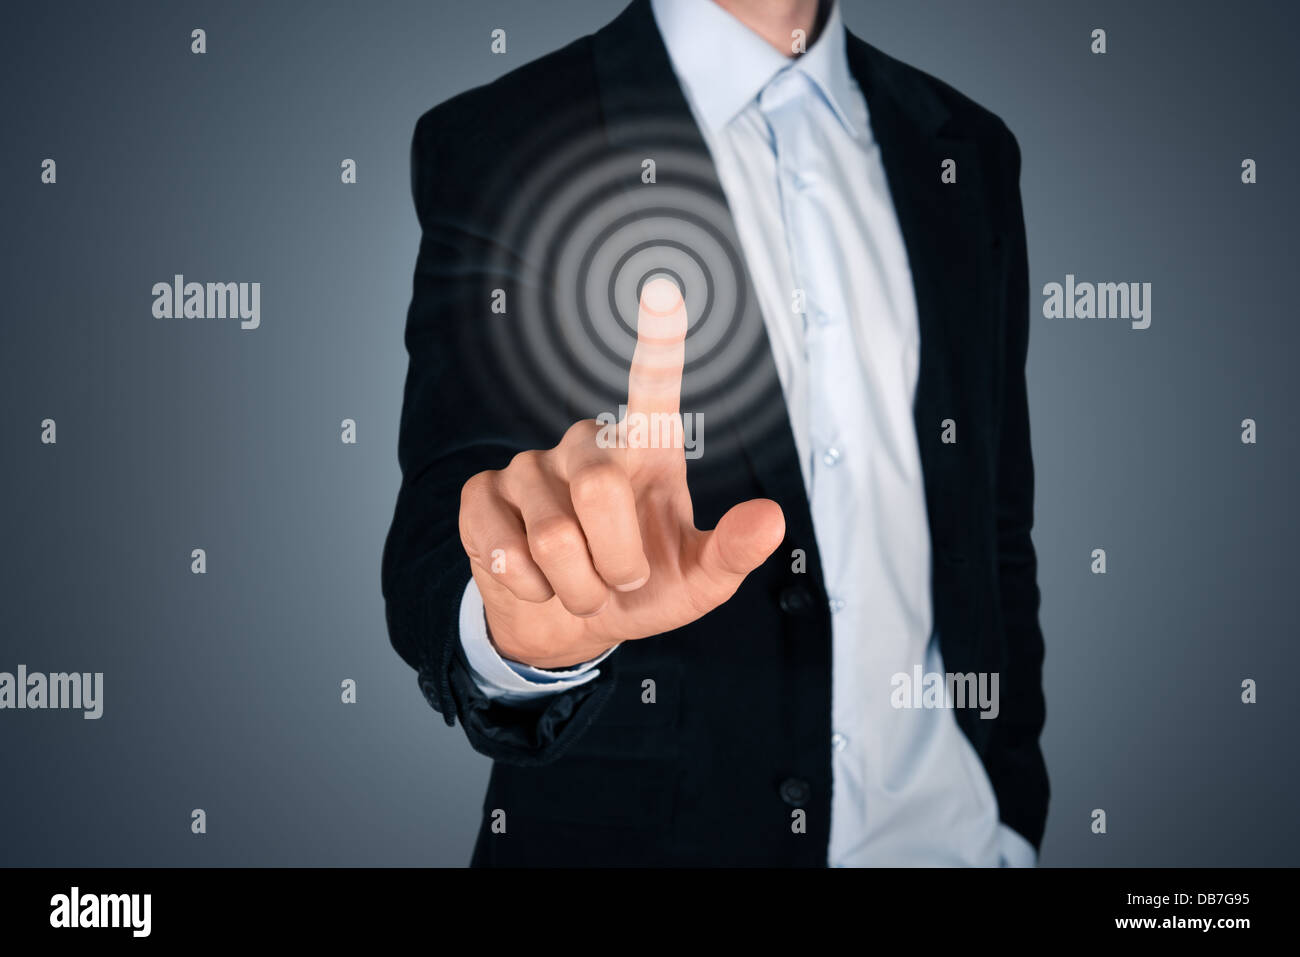 Portrait of business person touching button on invisible screen. Touch screen concept image. Isolated on dark gray background. Stock Photo